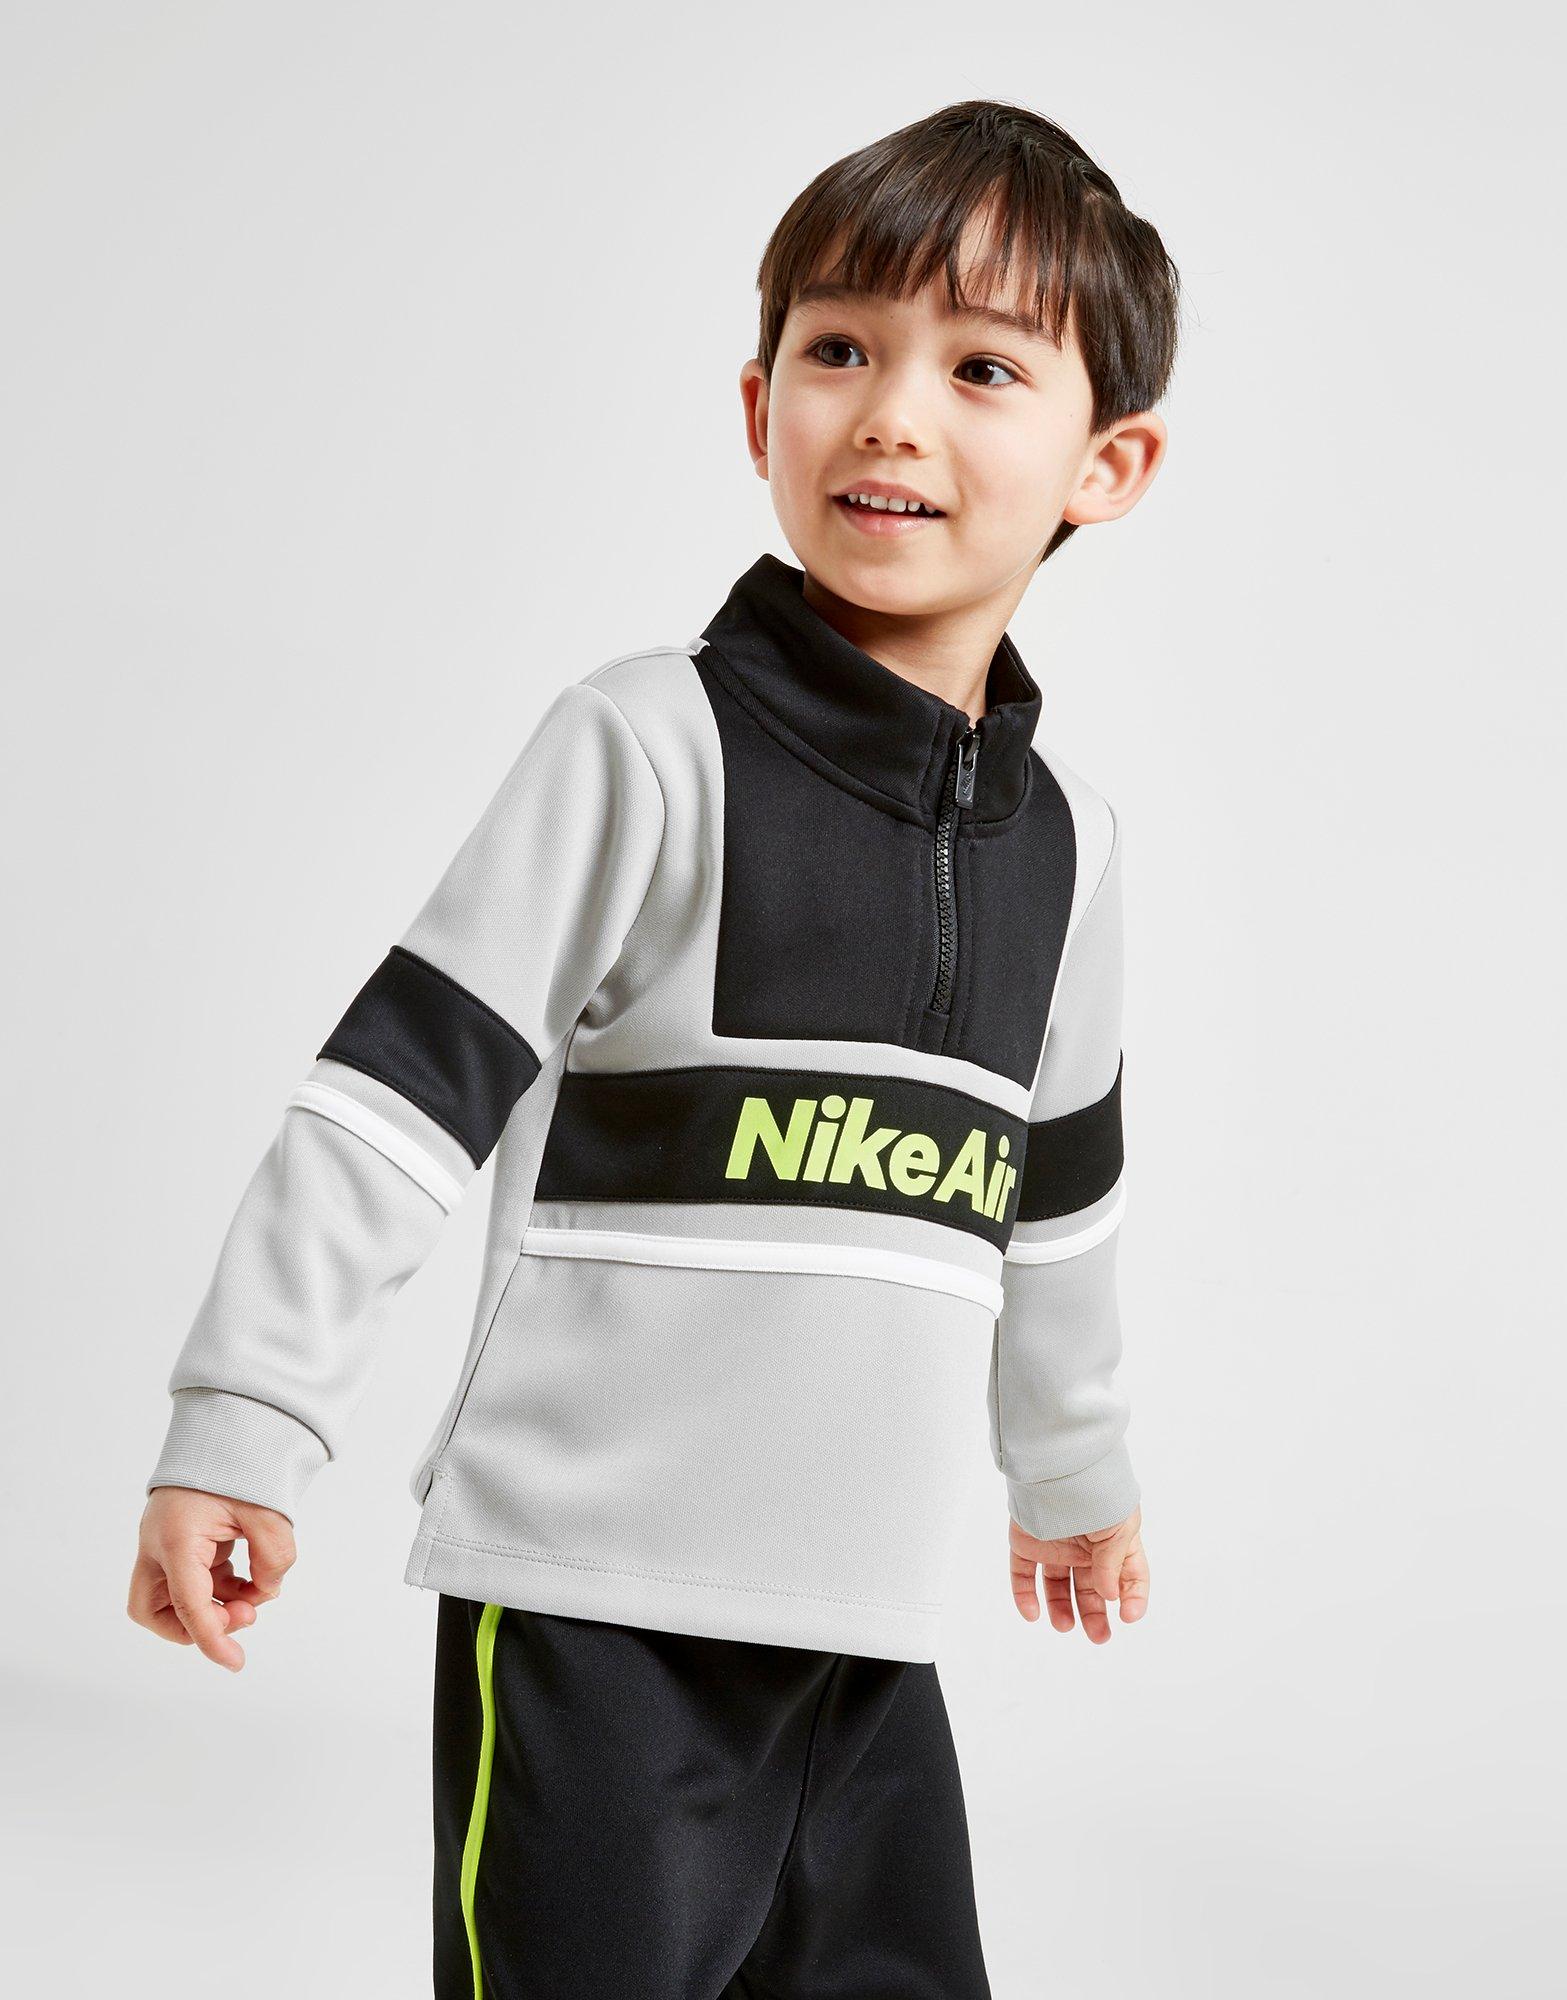 chandal nike para bebe factory outlet 9ce4c 81685